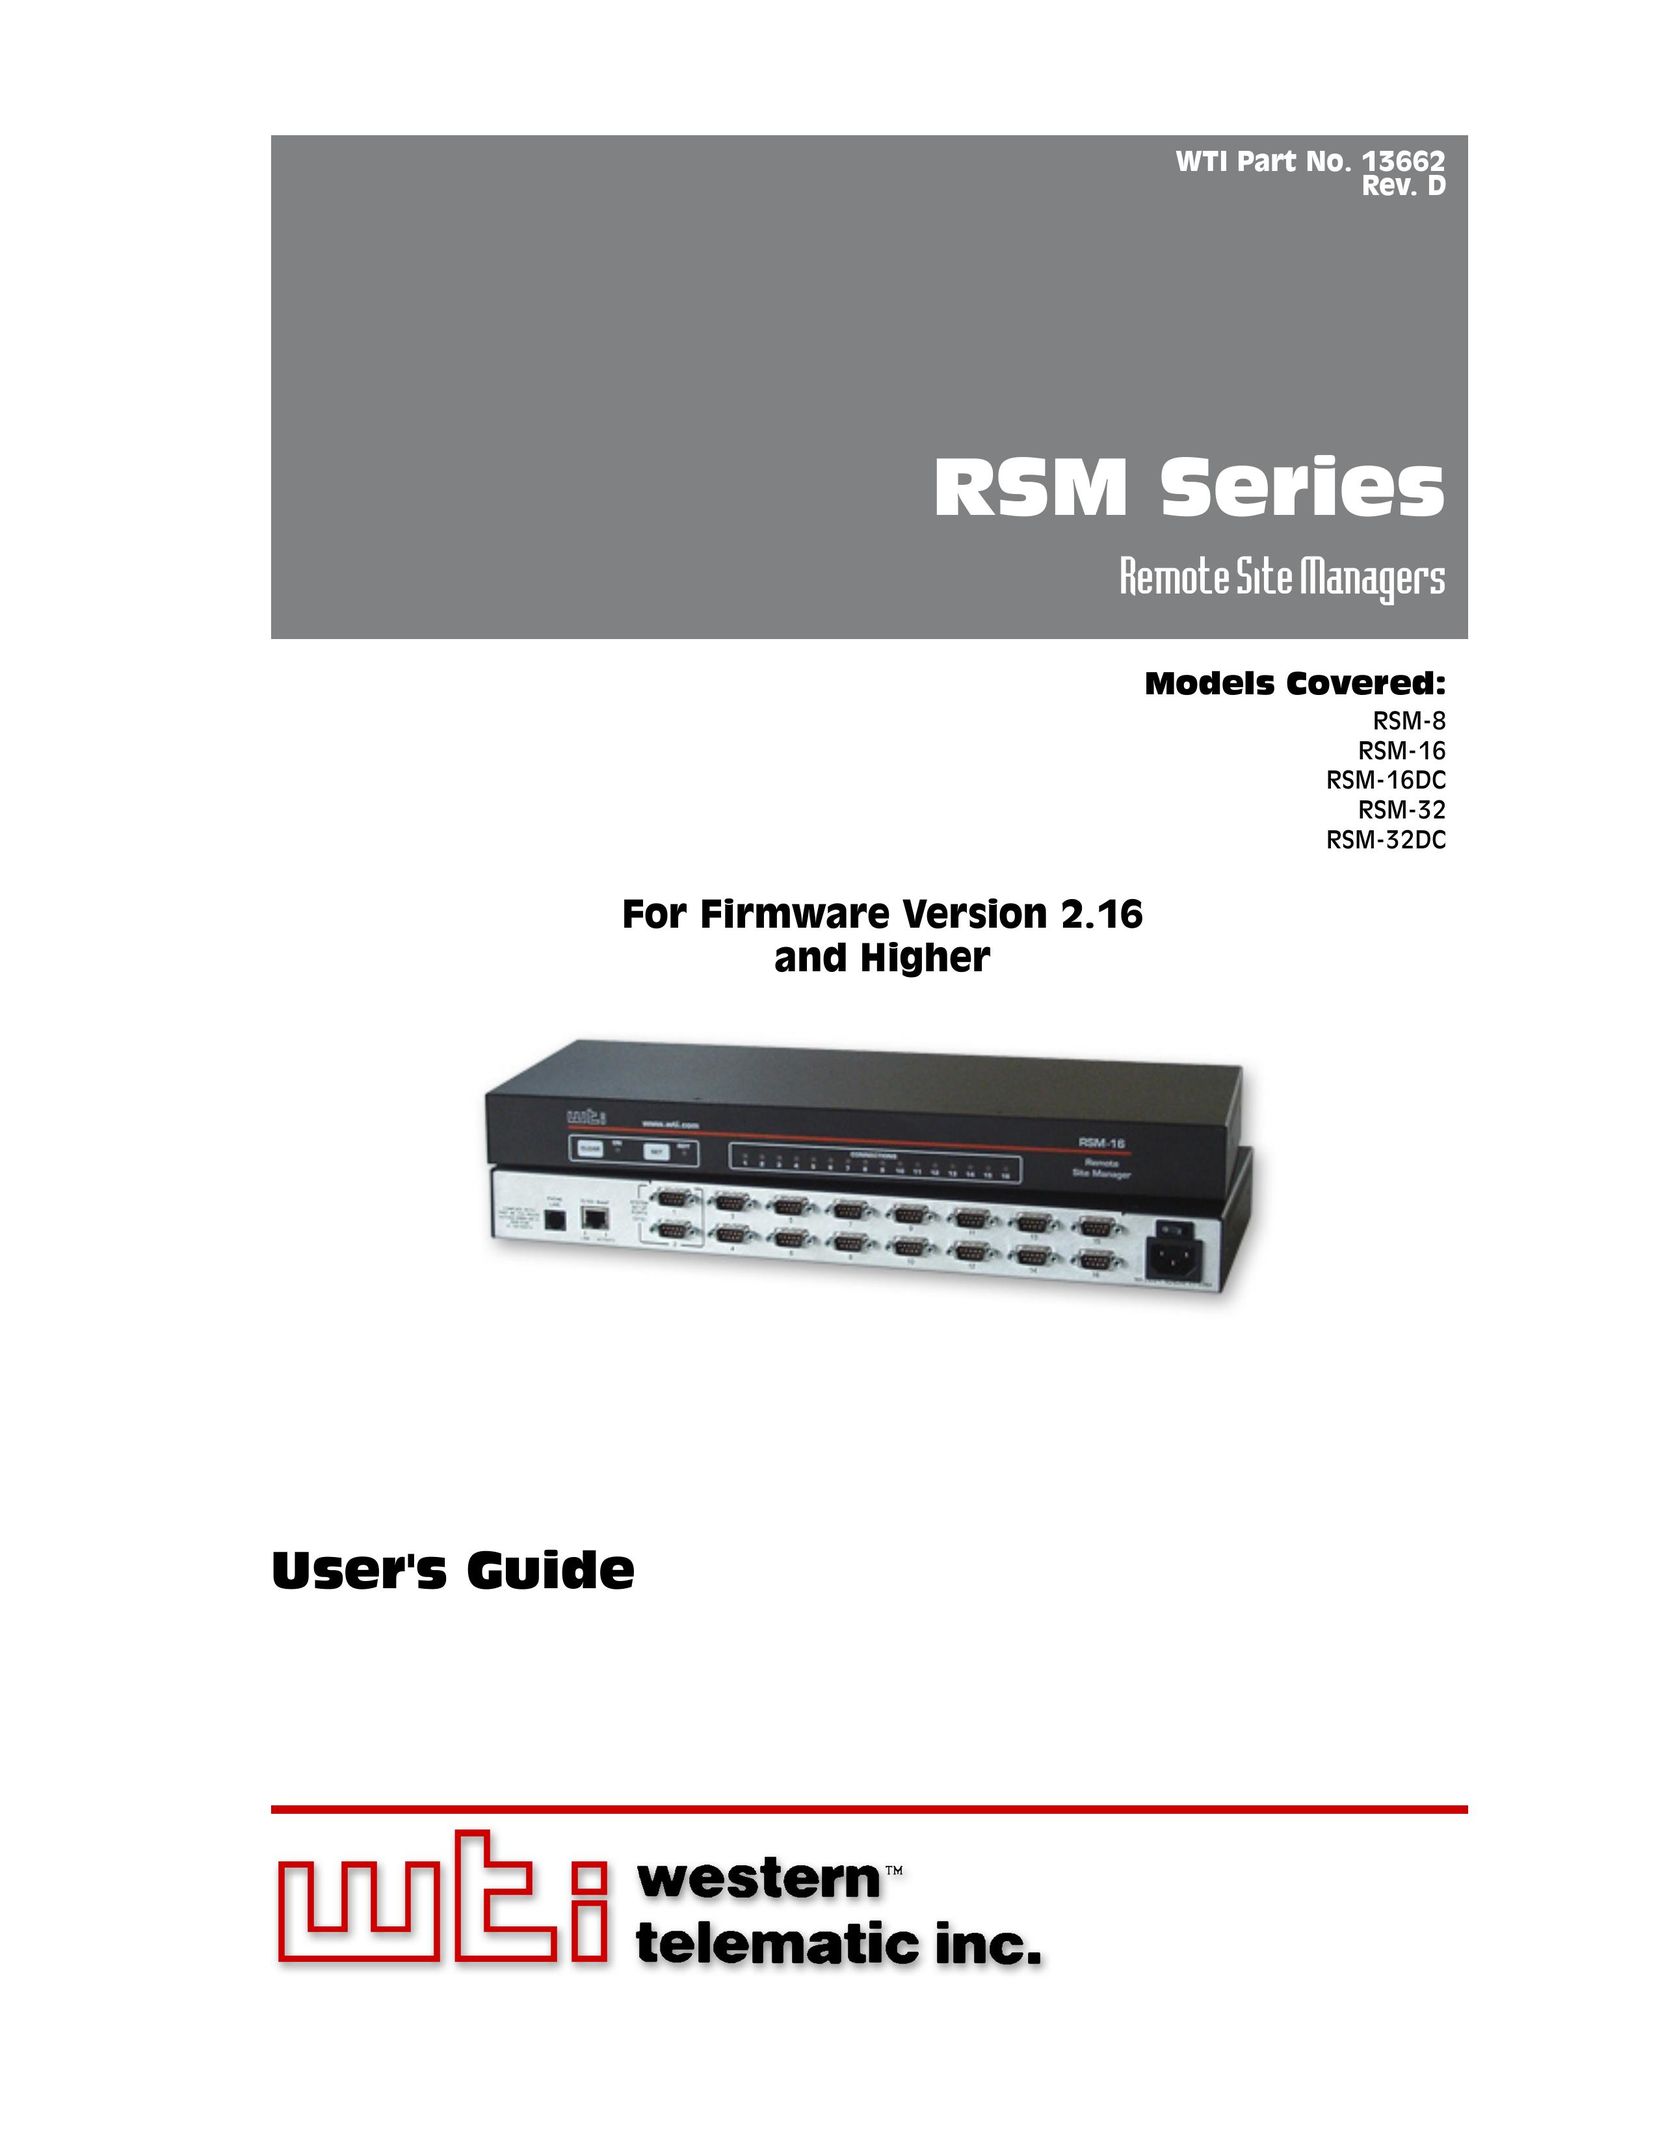 Western Telematic RSM-32DC Video Gaming Accessories User Manual